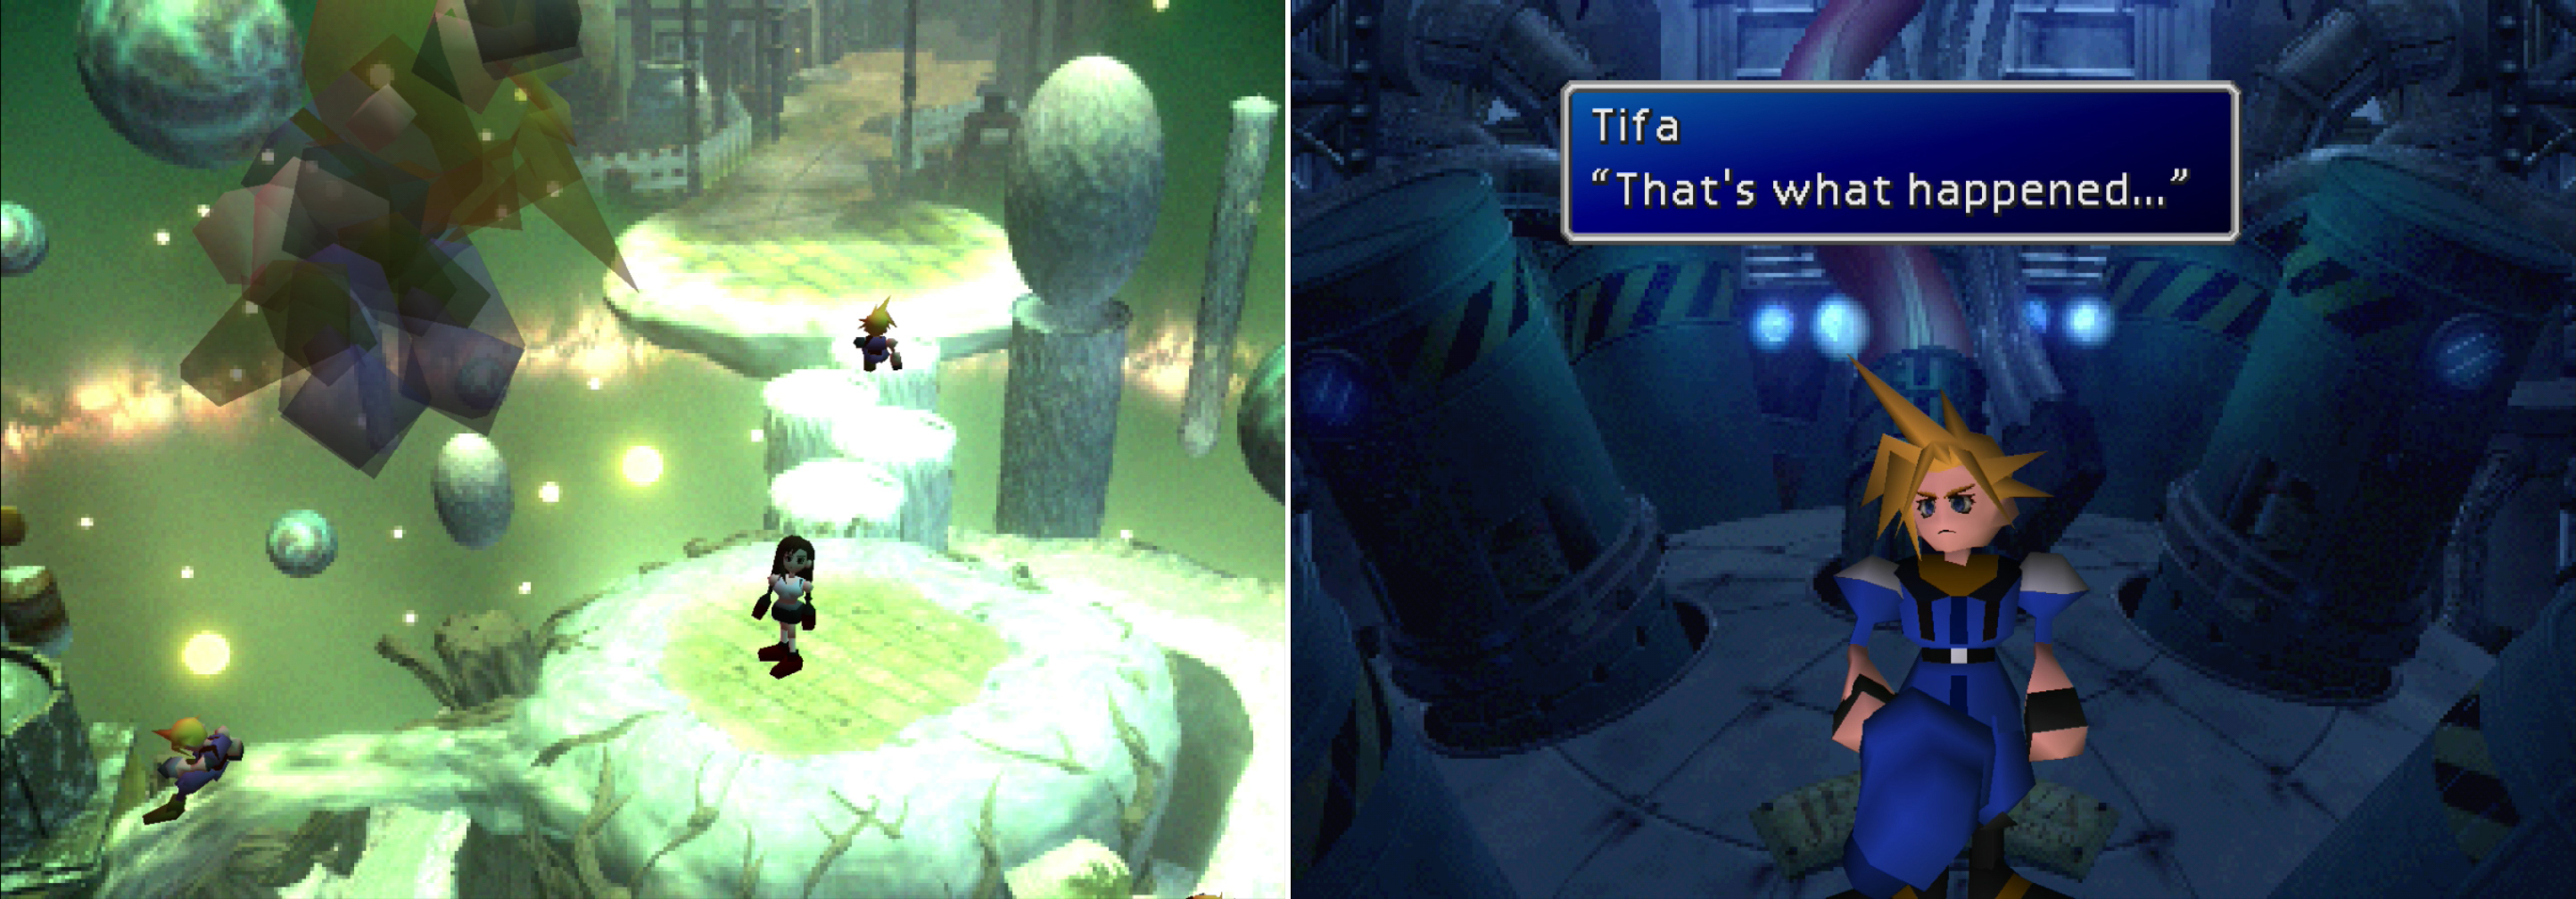 Tifa will have to help Cloud reassemble the broken fragments of his consciousness in the Lifestream (left). After picking through Cloud's repressed memories, the truth will finally be revealed (right).